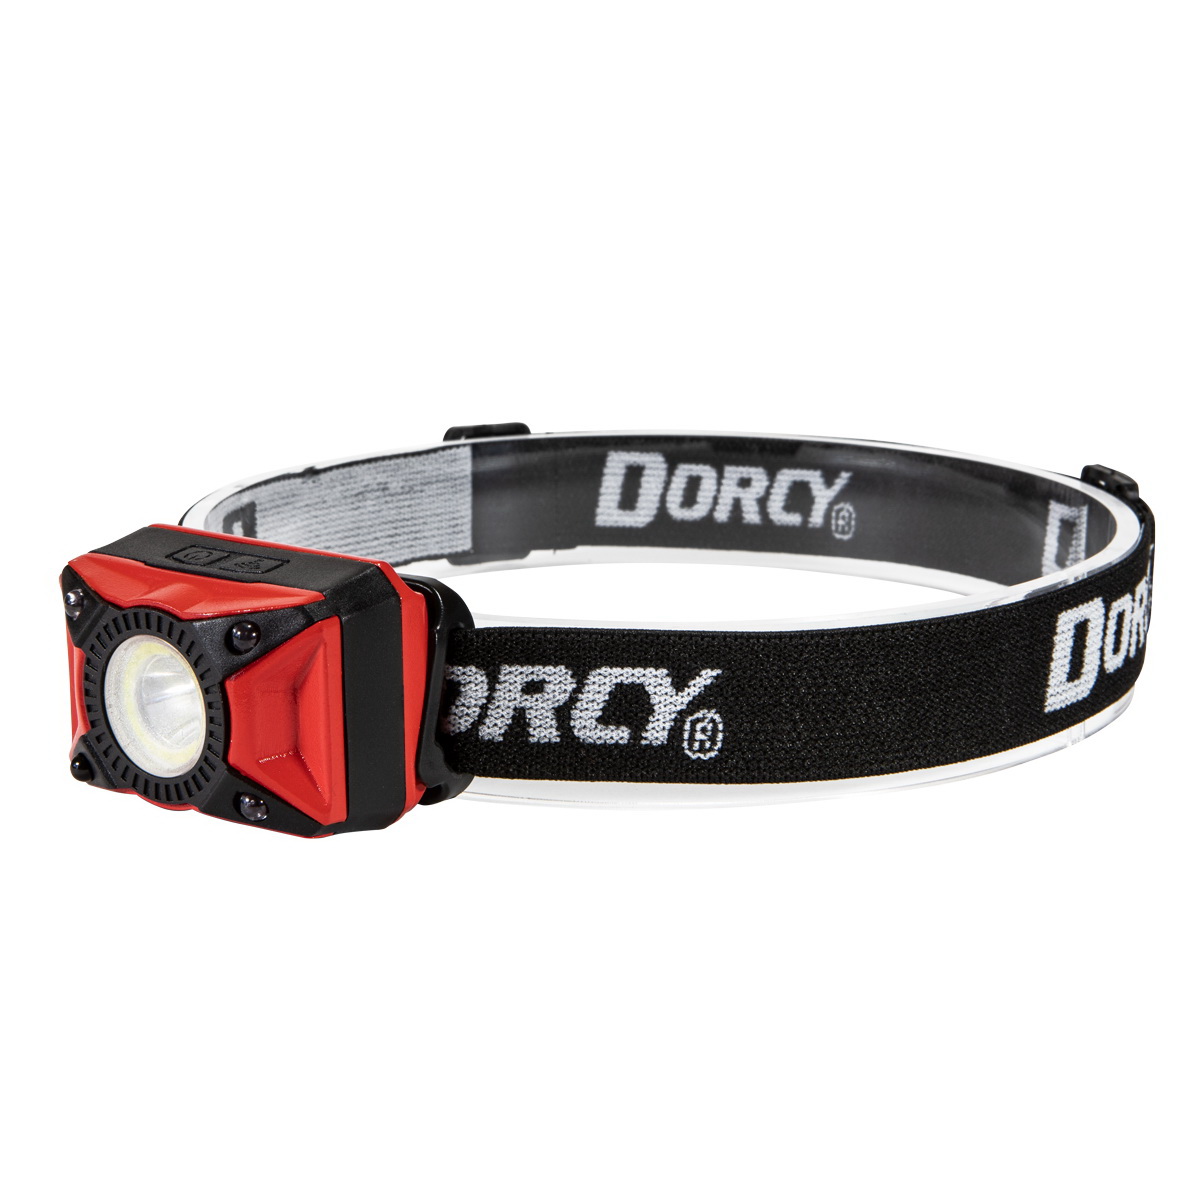 Dorcy Ultra HD 41-4337 Rechargeable Headlamp, 1200 mAh, Lithium-Ion Battery, LED Lamp, 650 Lumens, Flood, Spot Beam, Red